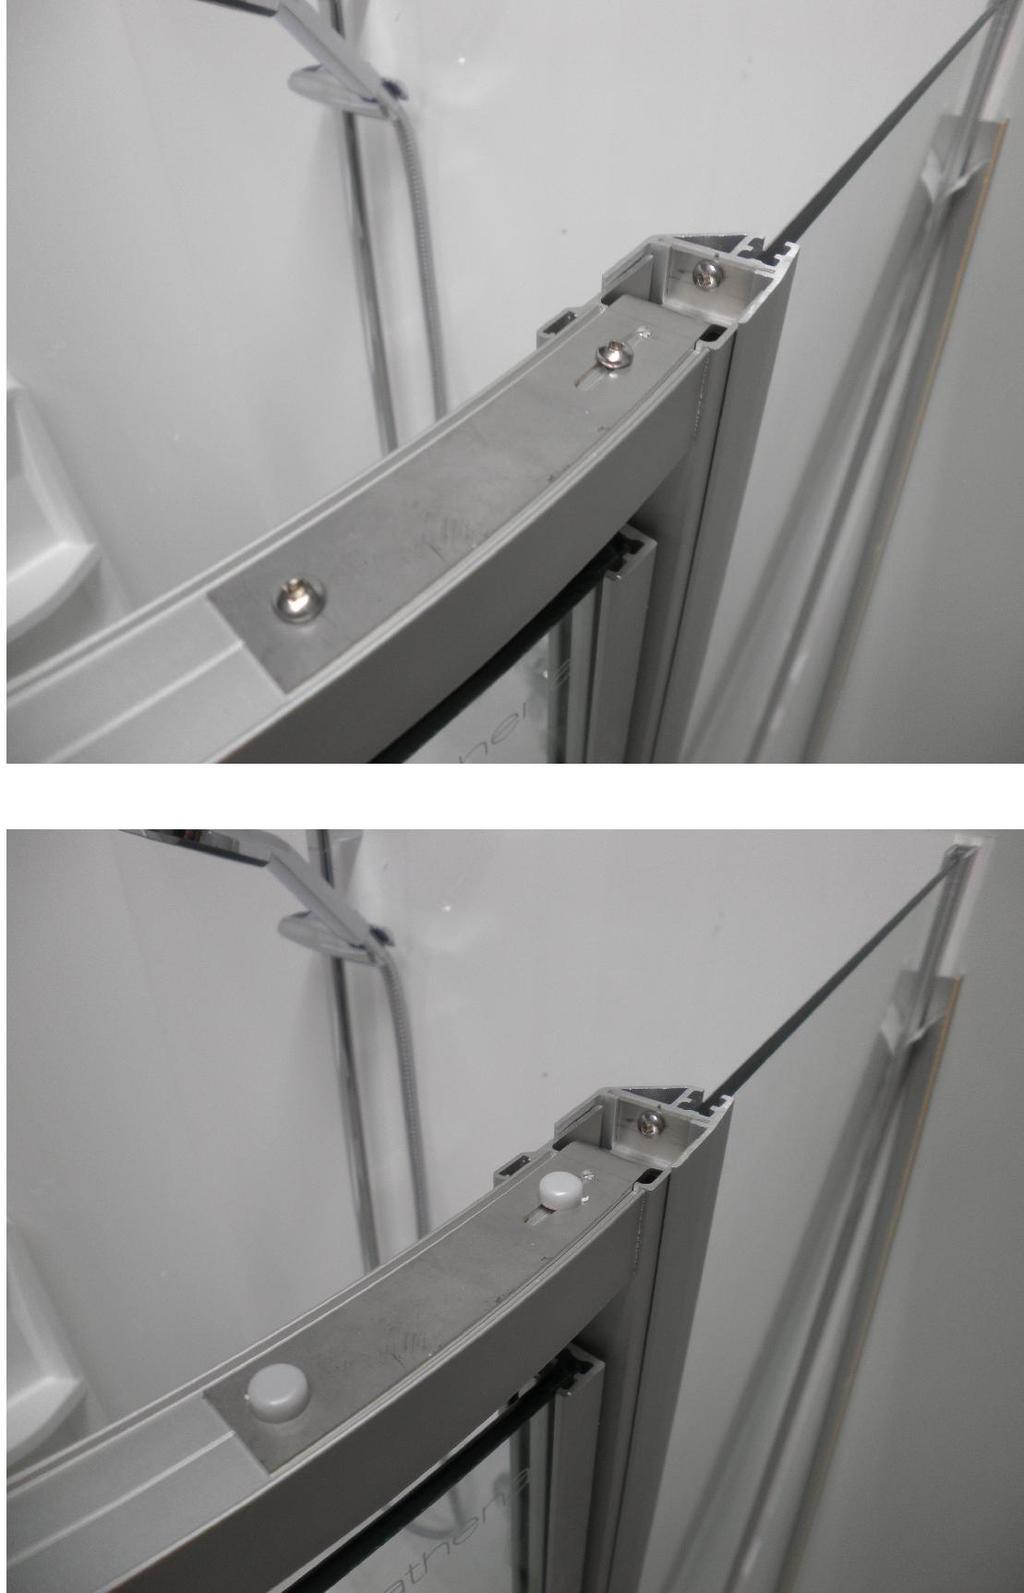 over the screw heads with the screw caps provided 26. Repeat for the otherside Please Note: Images shown are for a Round Enclosure. A Round shower uses a left hand and a right hand bracket.